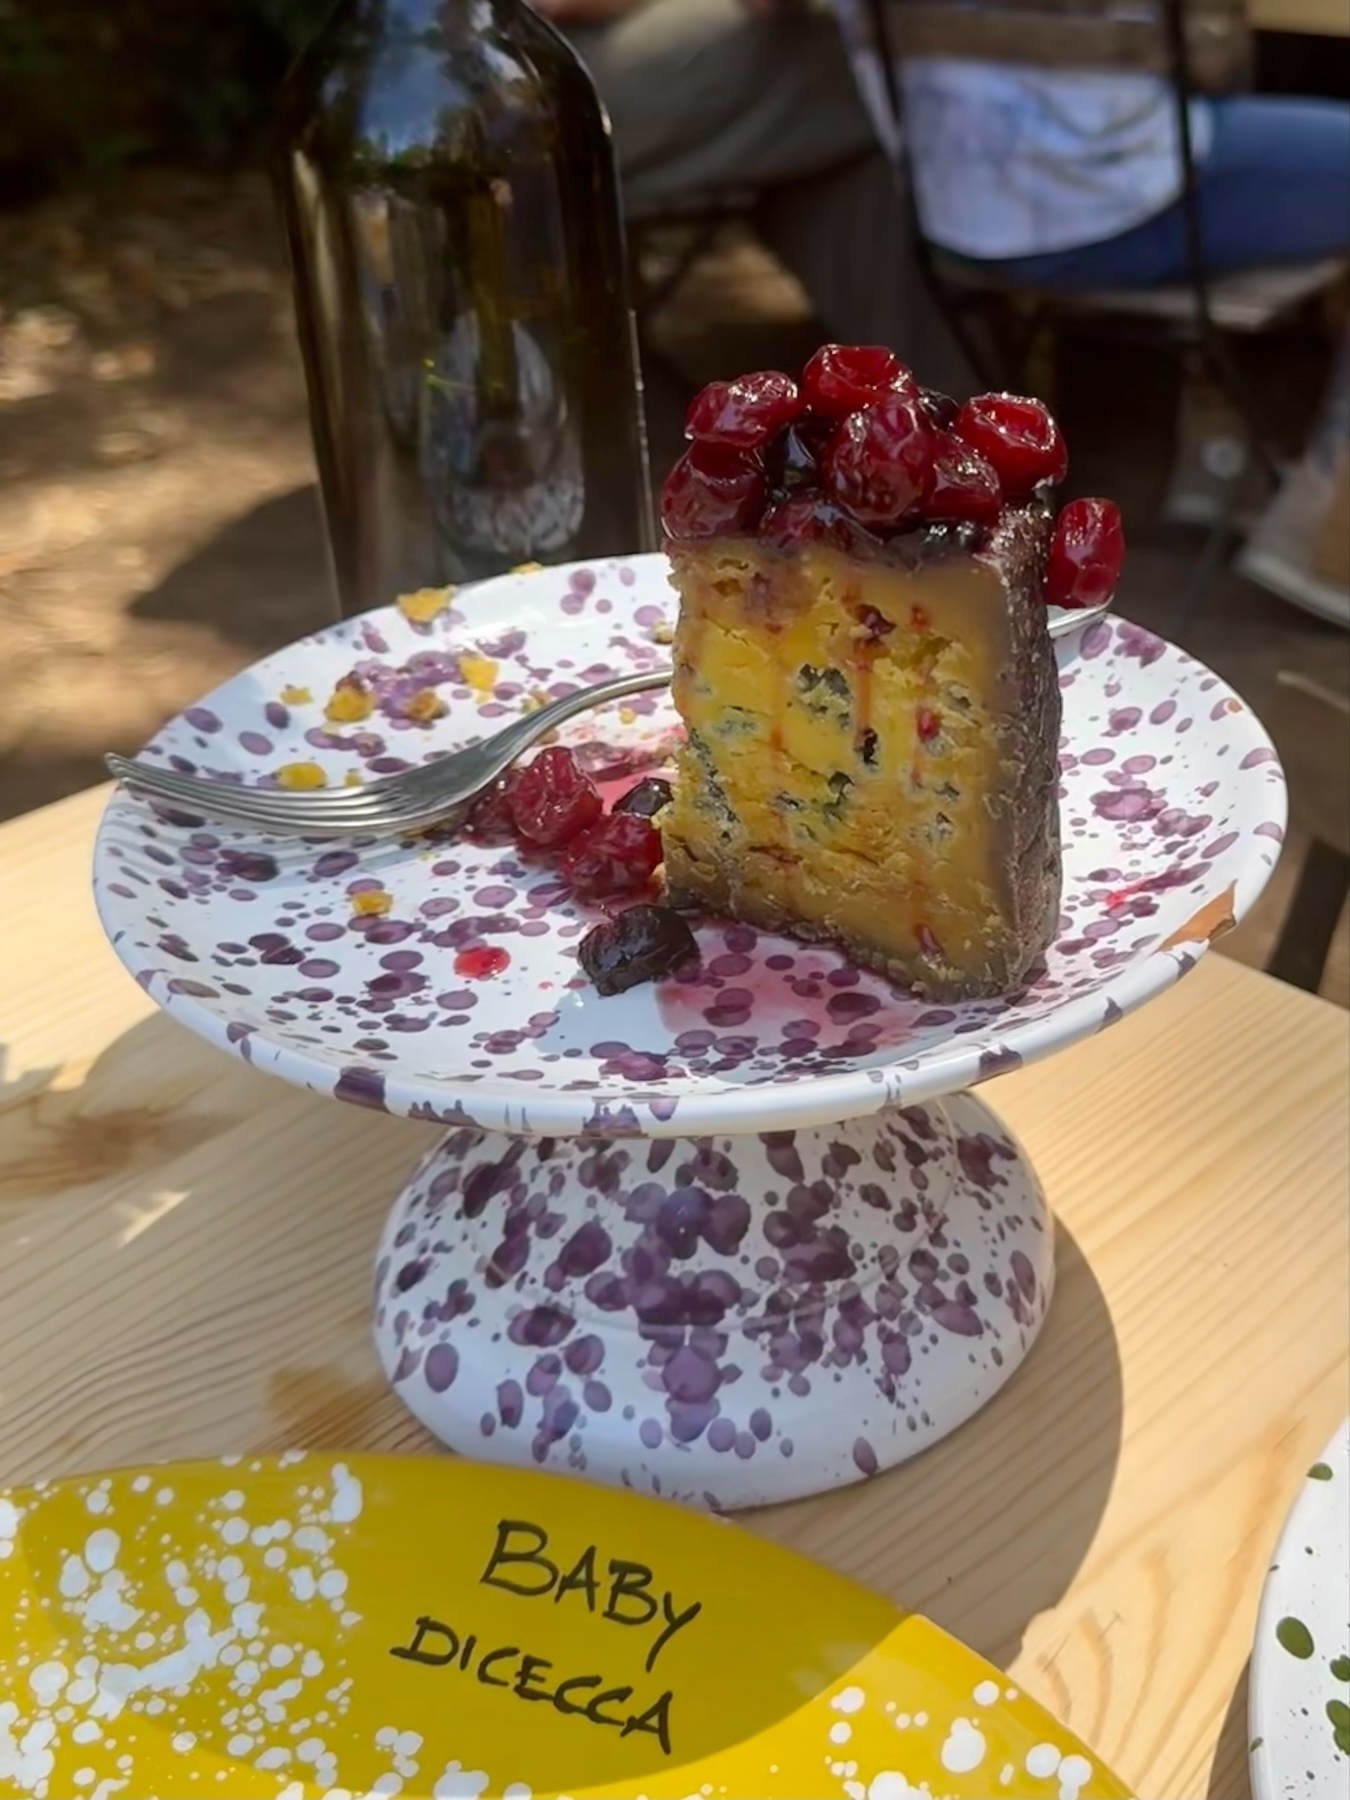 A slice of cake topped with berries is on a speckled cake stand, accompanied by a fork. There is a wine bottle in the background. In the foreground, a yellow plate labeled “BABY DICECCA” is visible. 